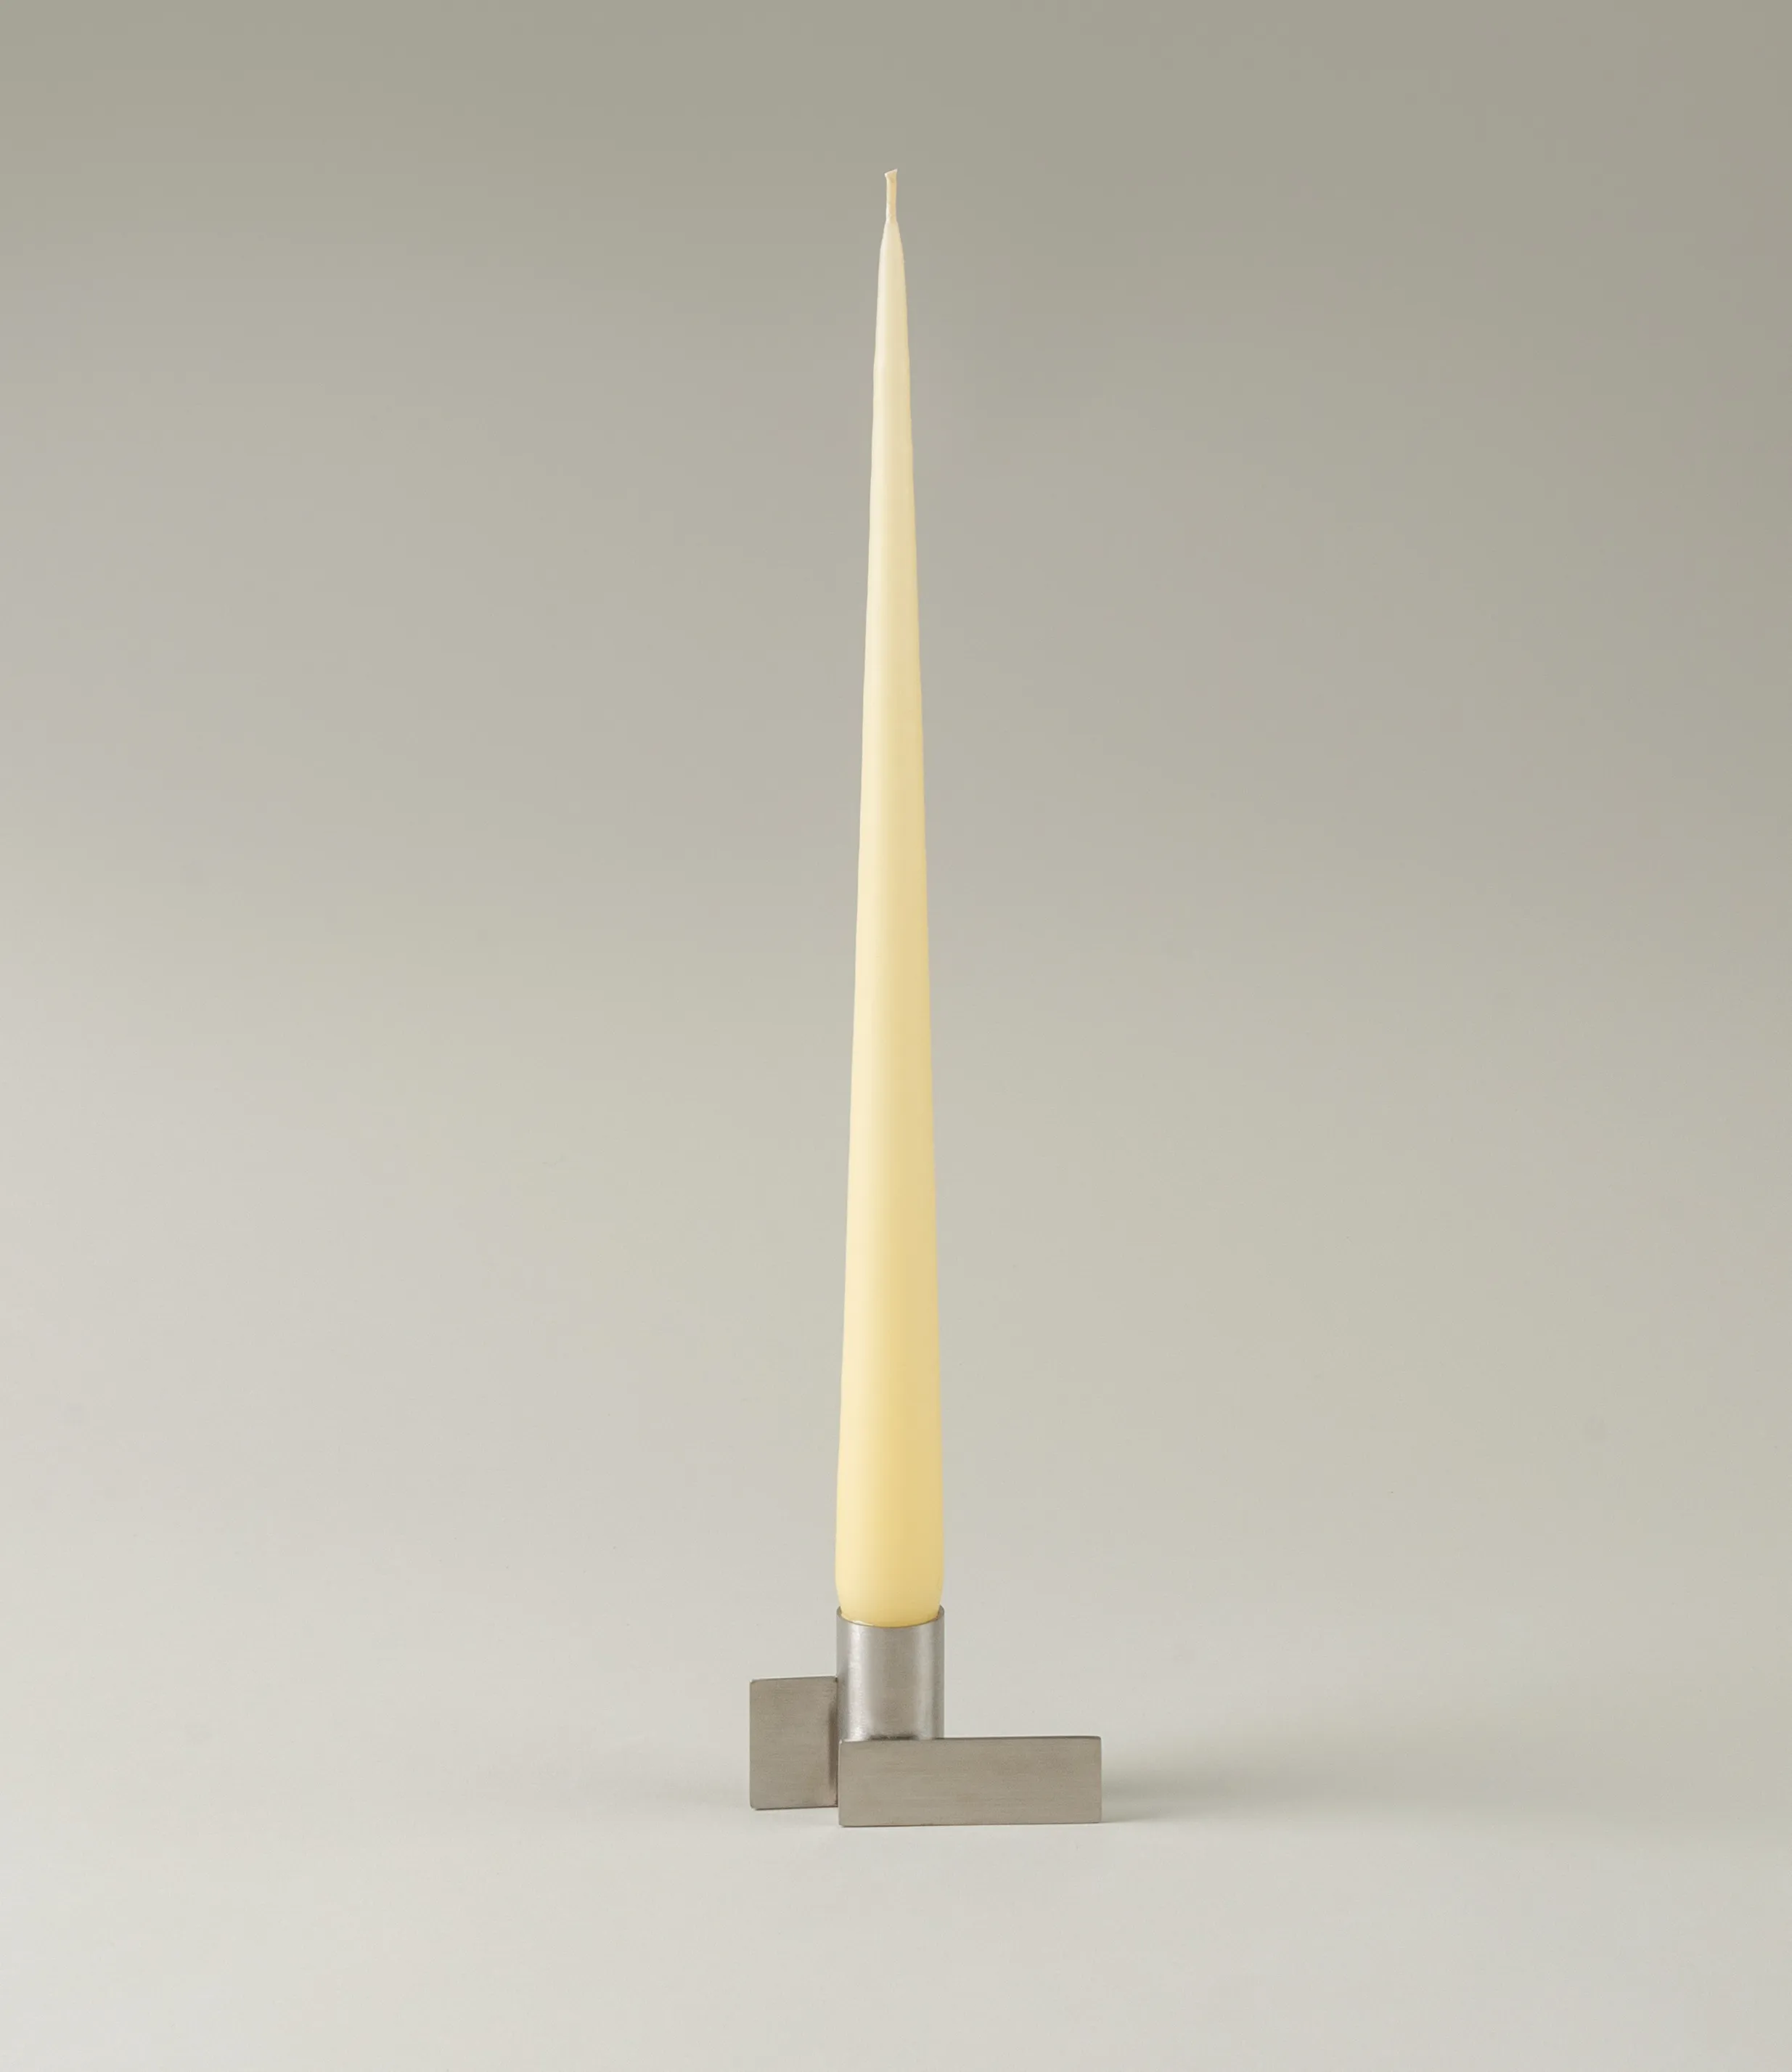 Ester&Erik Taper Candle coming in a Buttermilk shade. The product is showcased in a stainless steel Icon Candleholder from Stences.